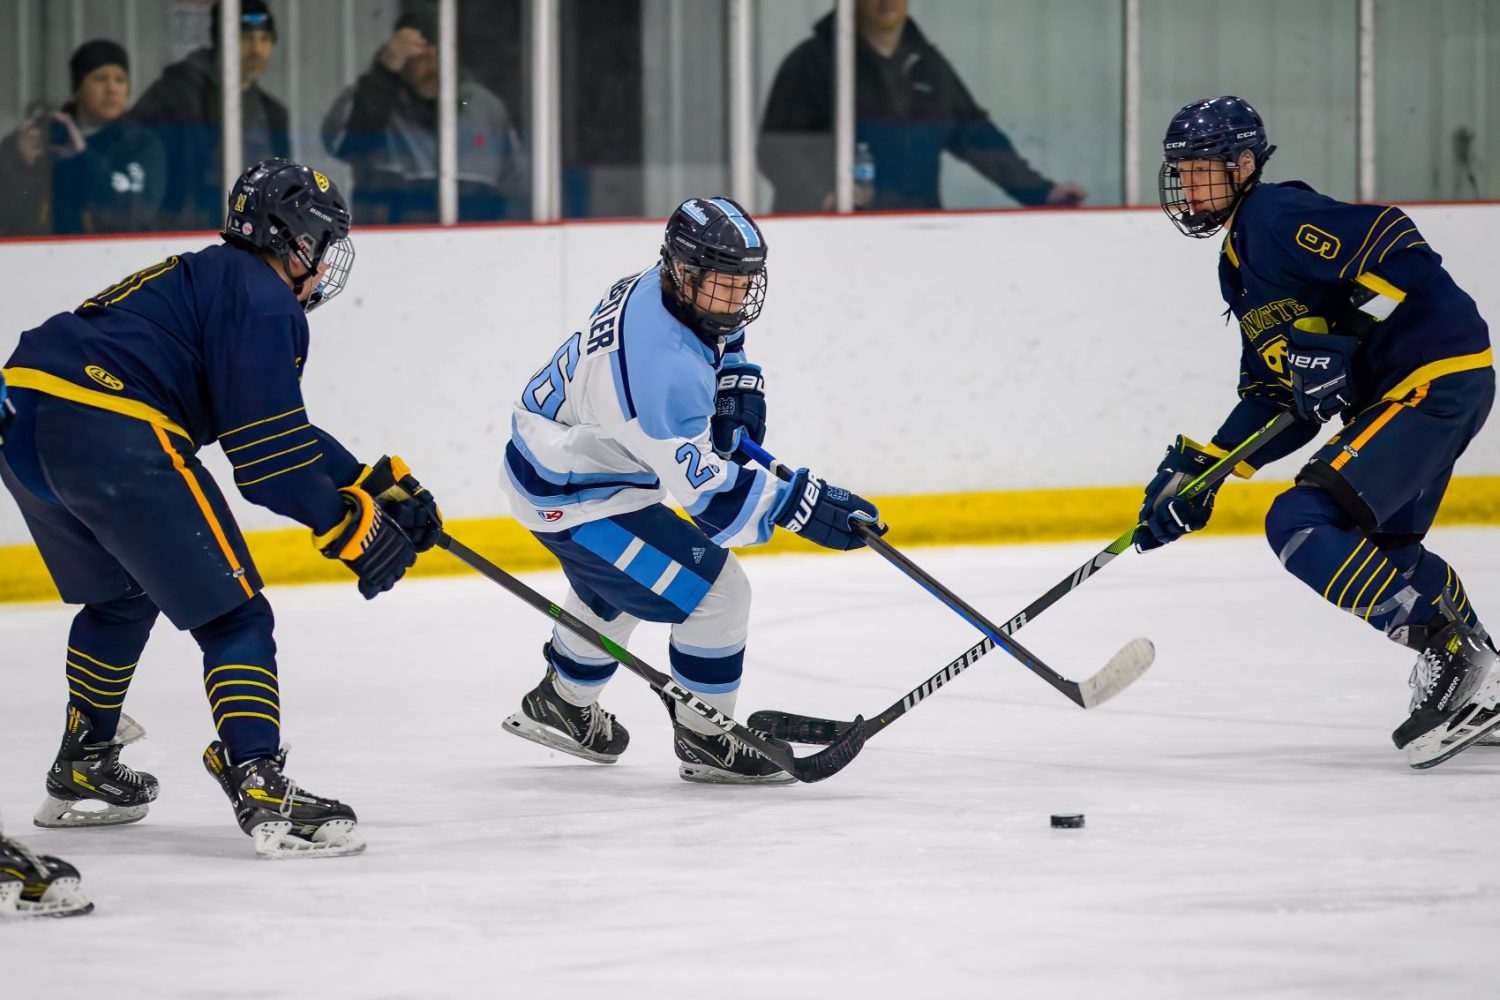 Hockey schedules through December for Mona Shores, Grand Haven, R-P and Kenowa Hills